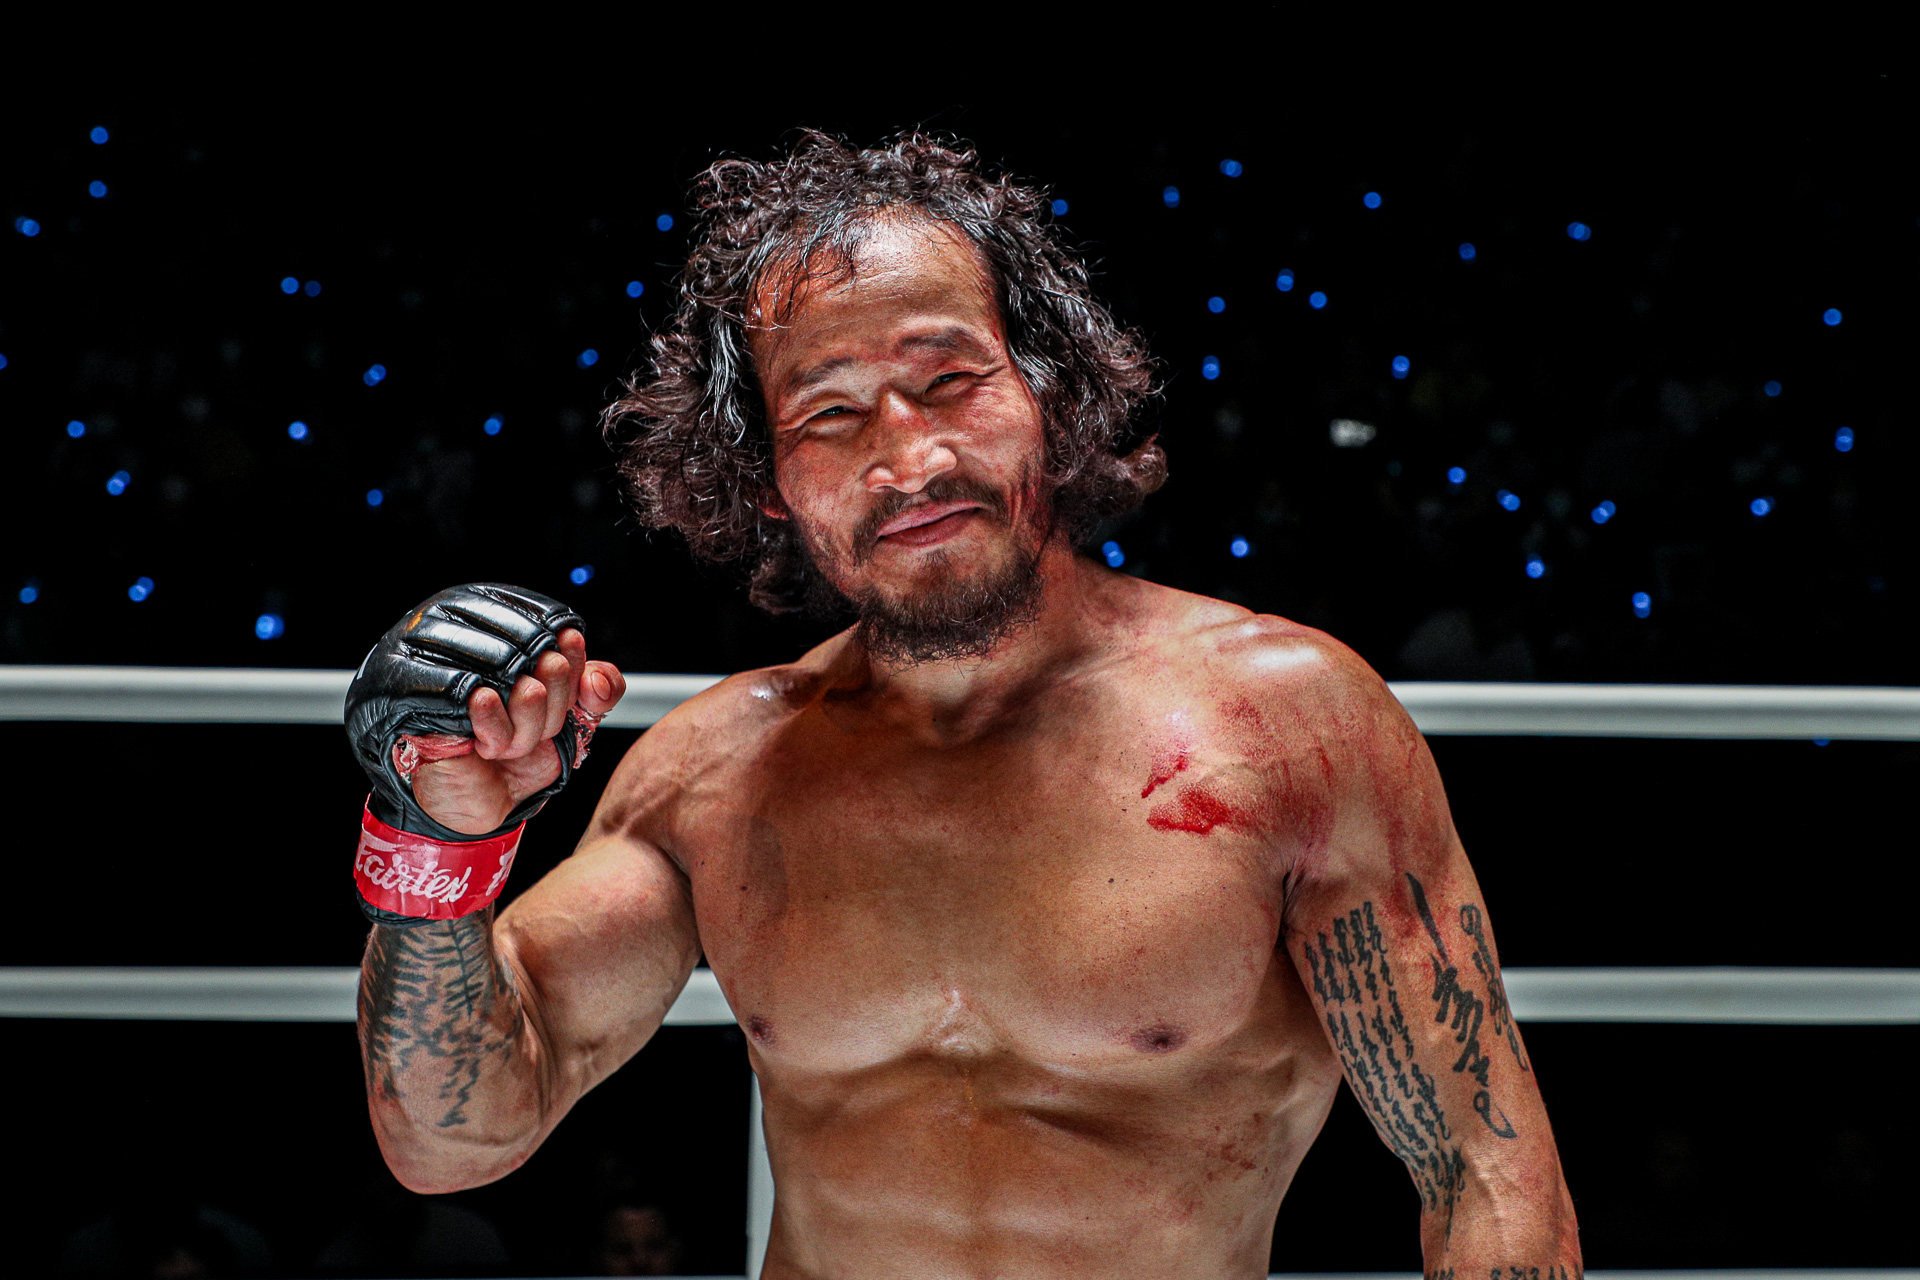 Enkh-Orgil Baatarkhuu is looking to continue his impressive record against Filipino fighters at ONE Championship. Photo: ONE Championship